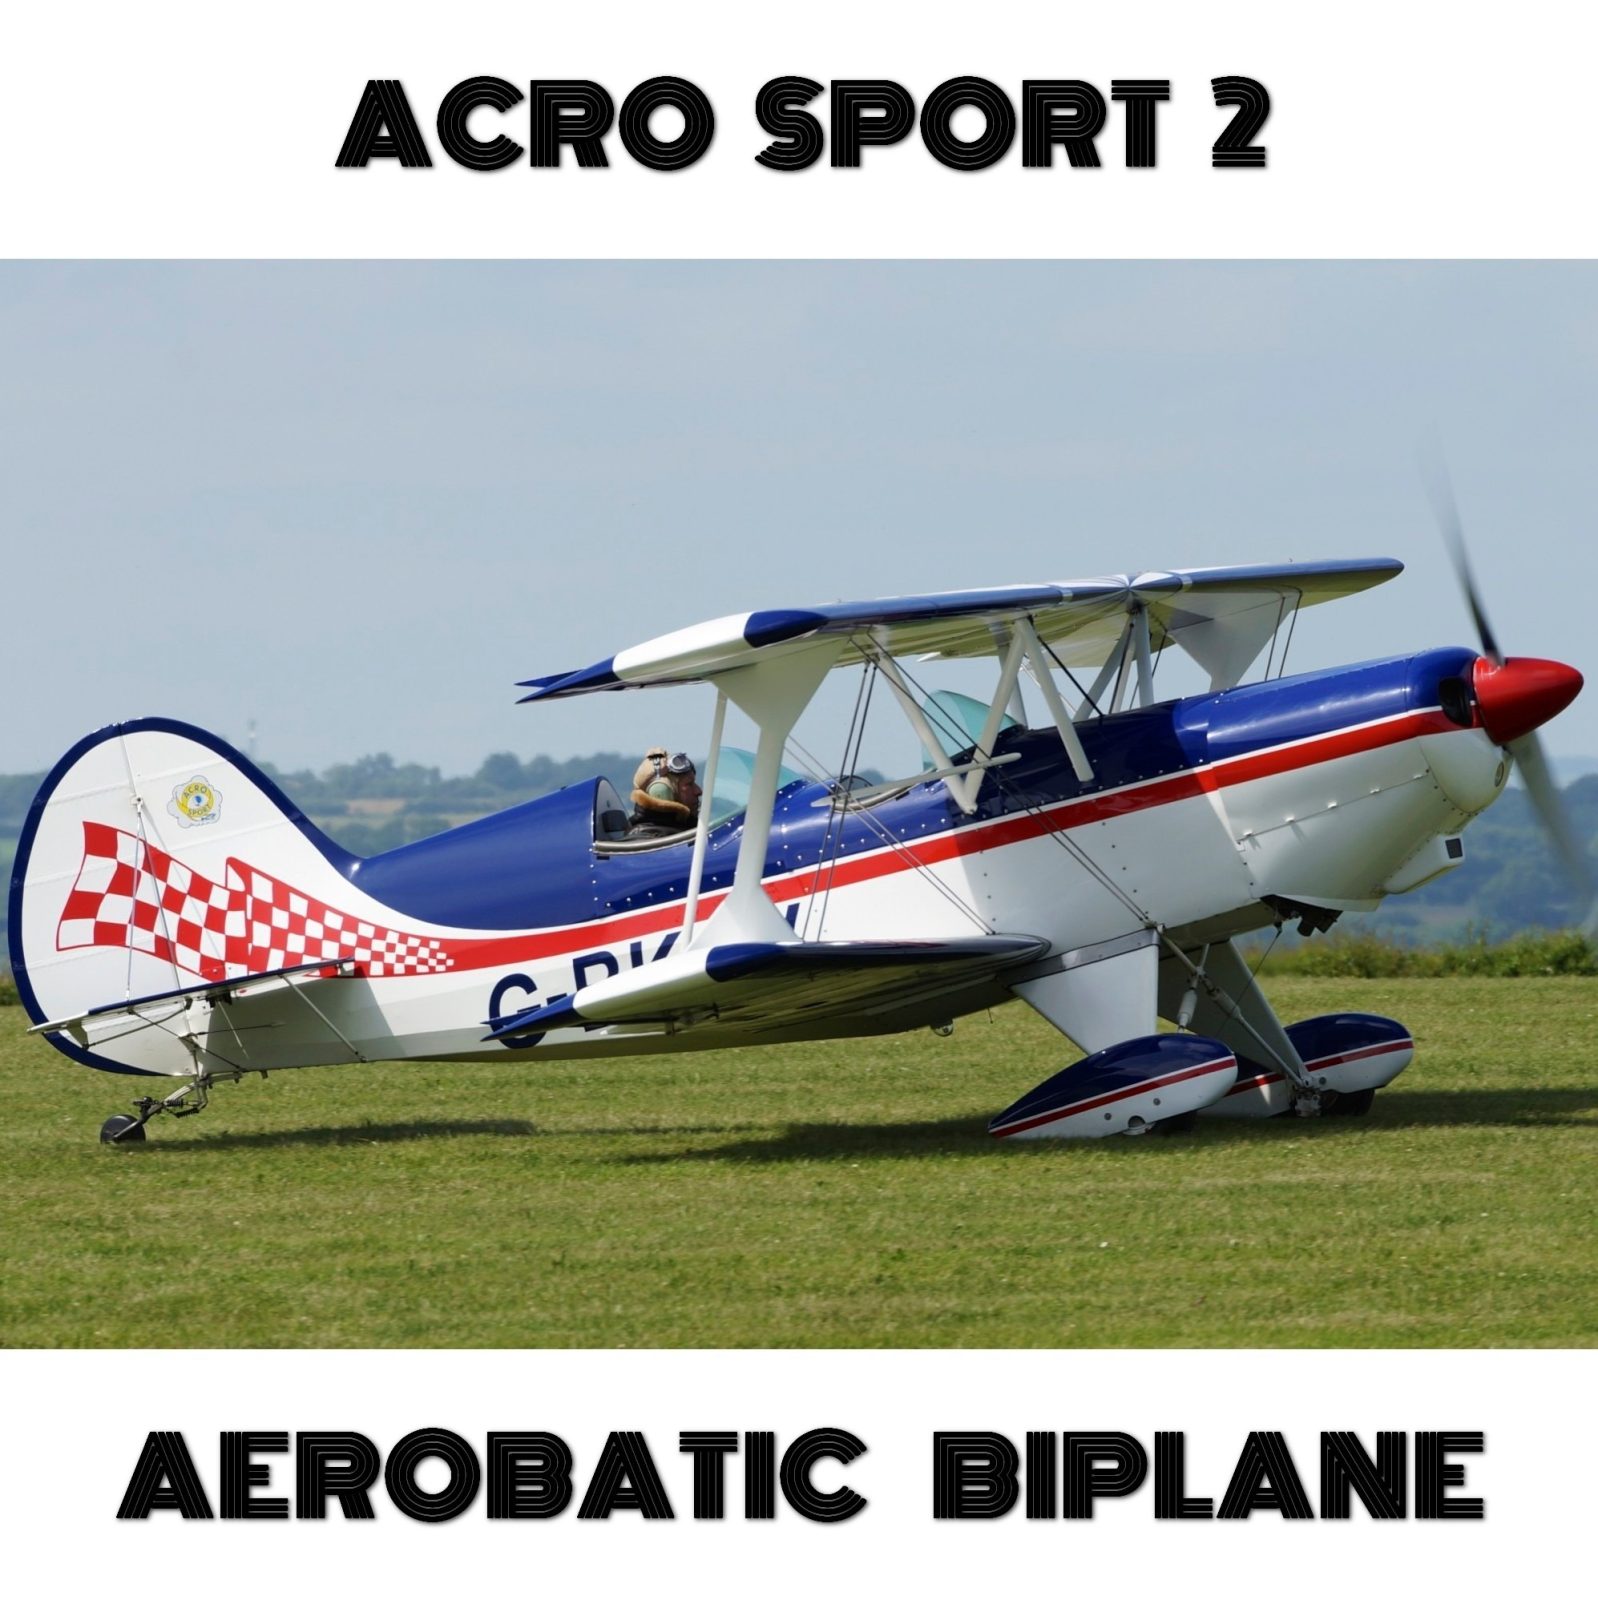 ACRO SPORT II Specifications, Cabin Dimensions, Performance